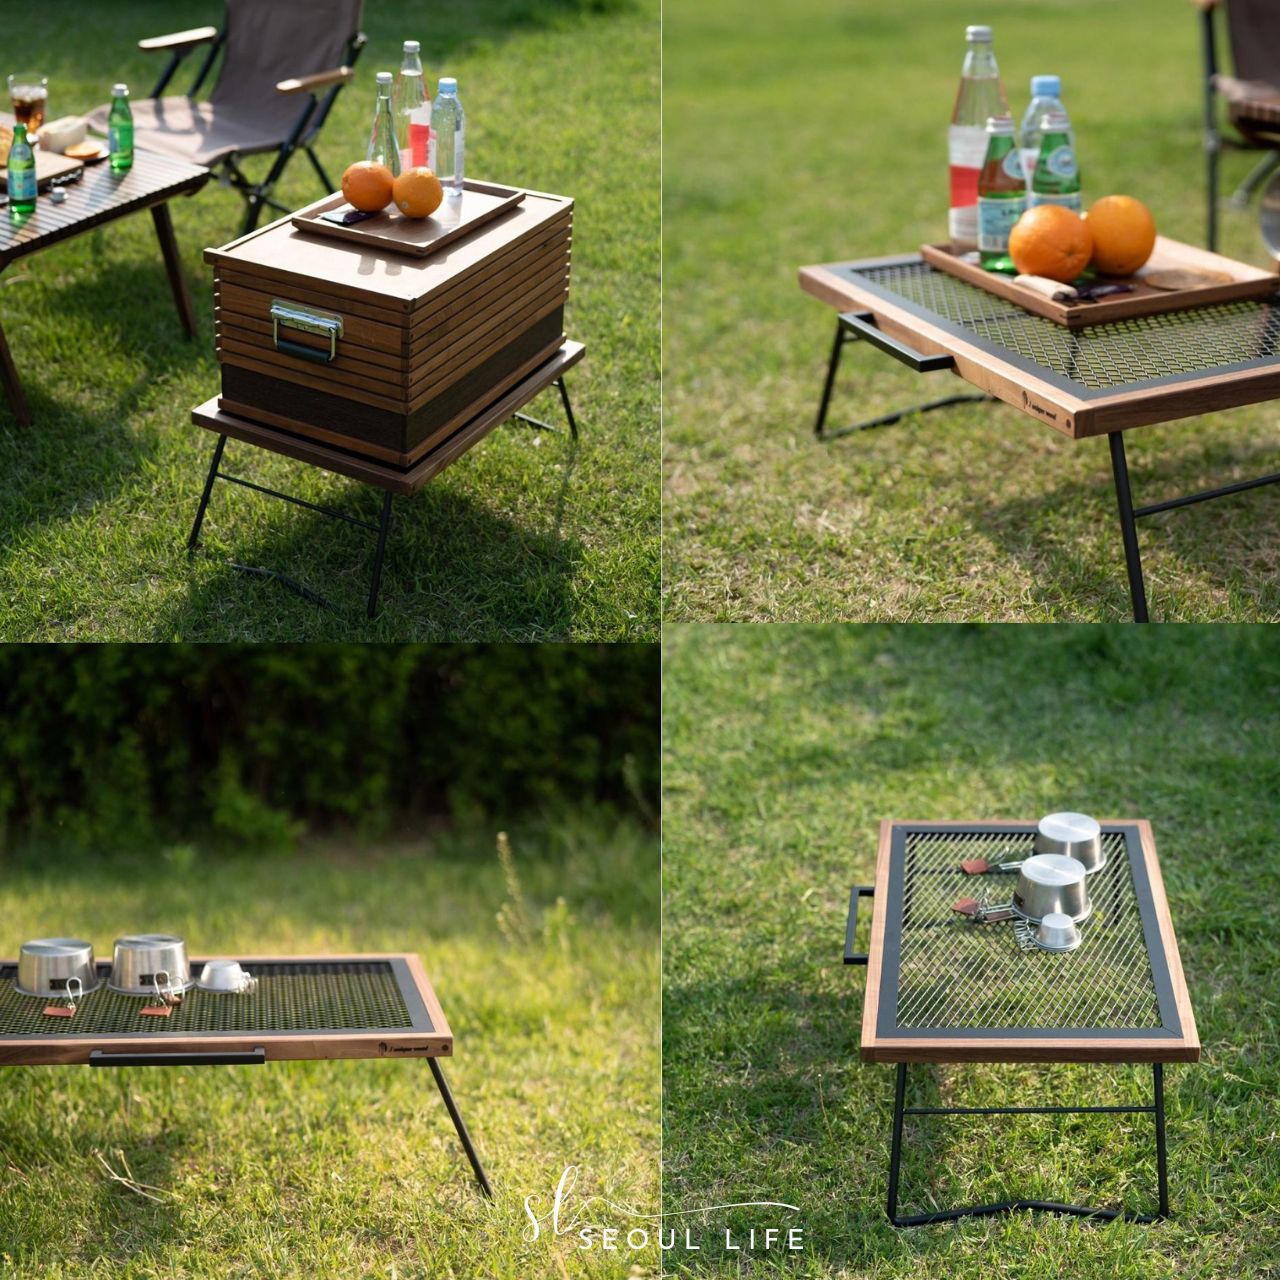 [J.Unique.Wood] Handcraft Tough Table Oak Foldable Iron Camping Table Fire Stand Side Table